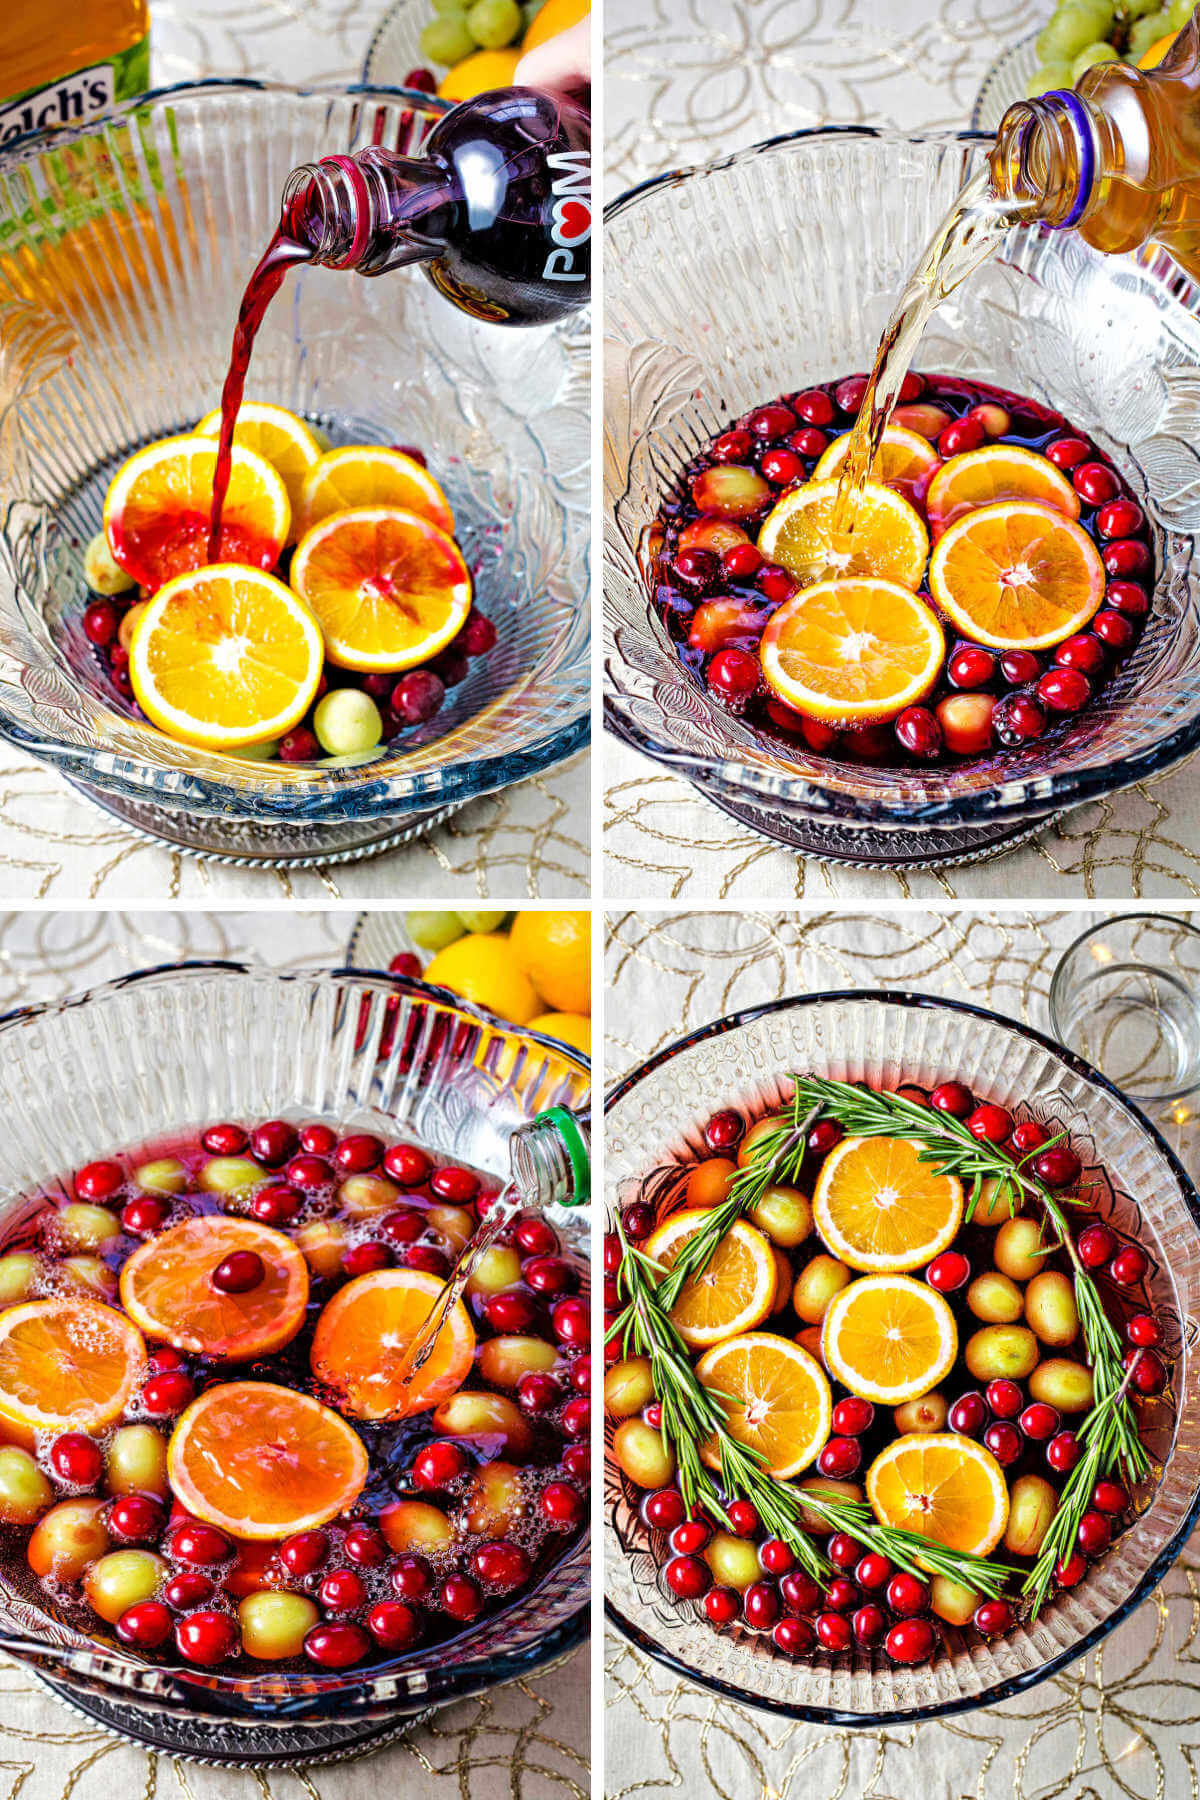 pouring pomegranate juice, white grape juice, and gingerale into a bowl with fruit.